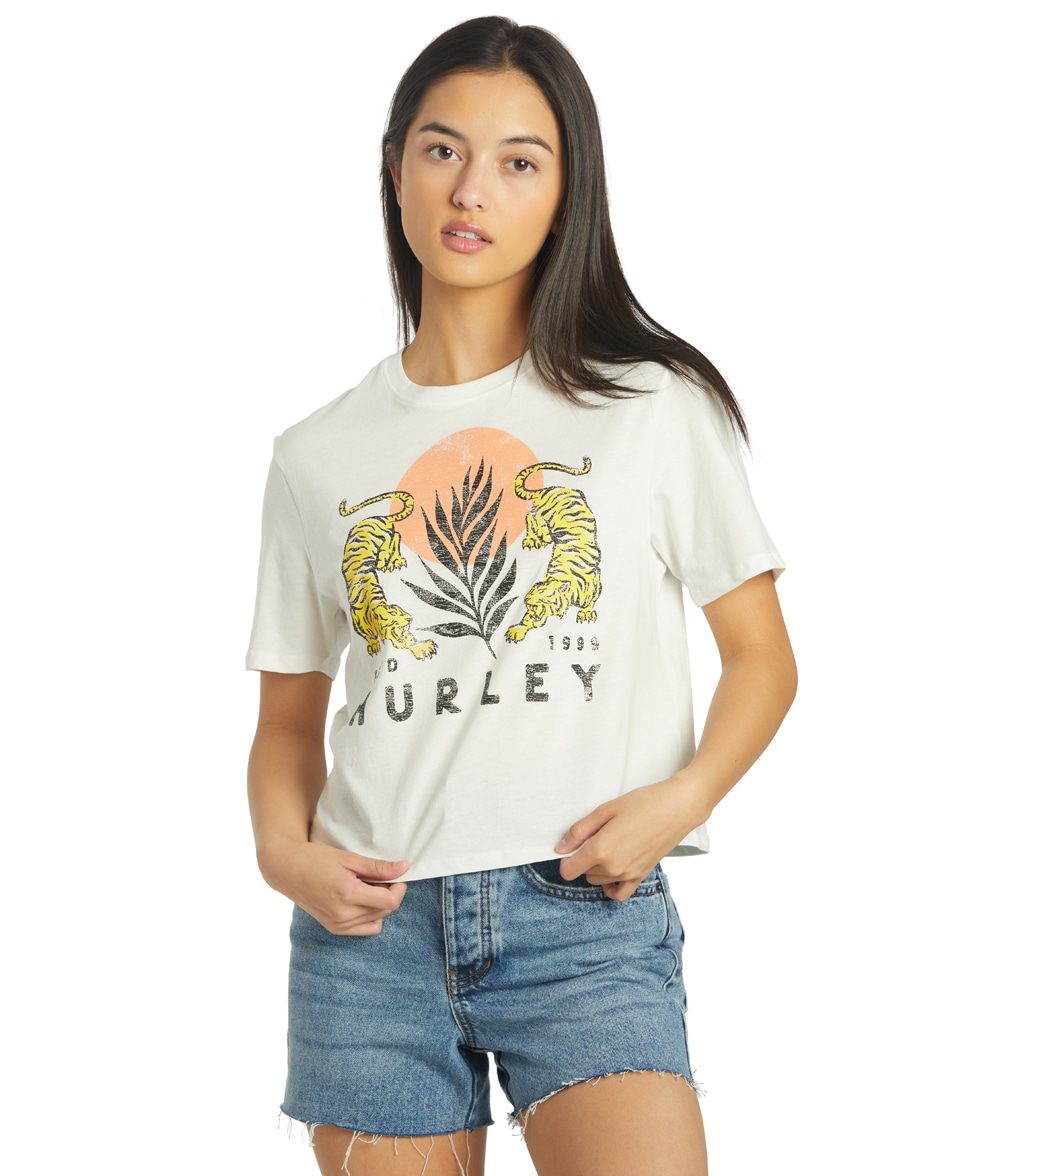 Hurley Women's Le Tigre Cropped Crew Tee Shirt - Marshmallow Large - Swimoutlet.com